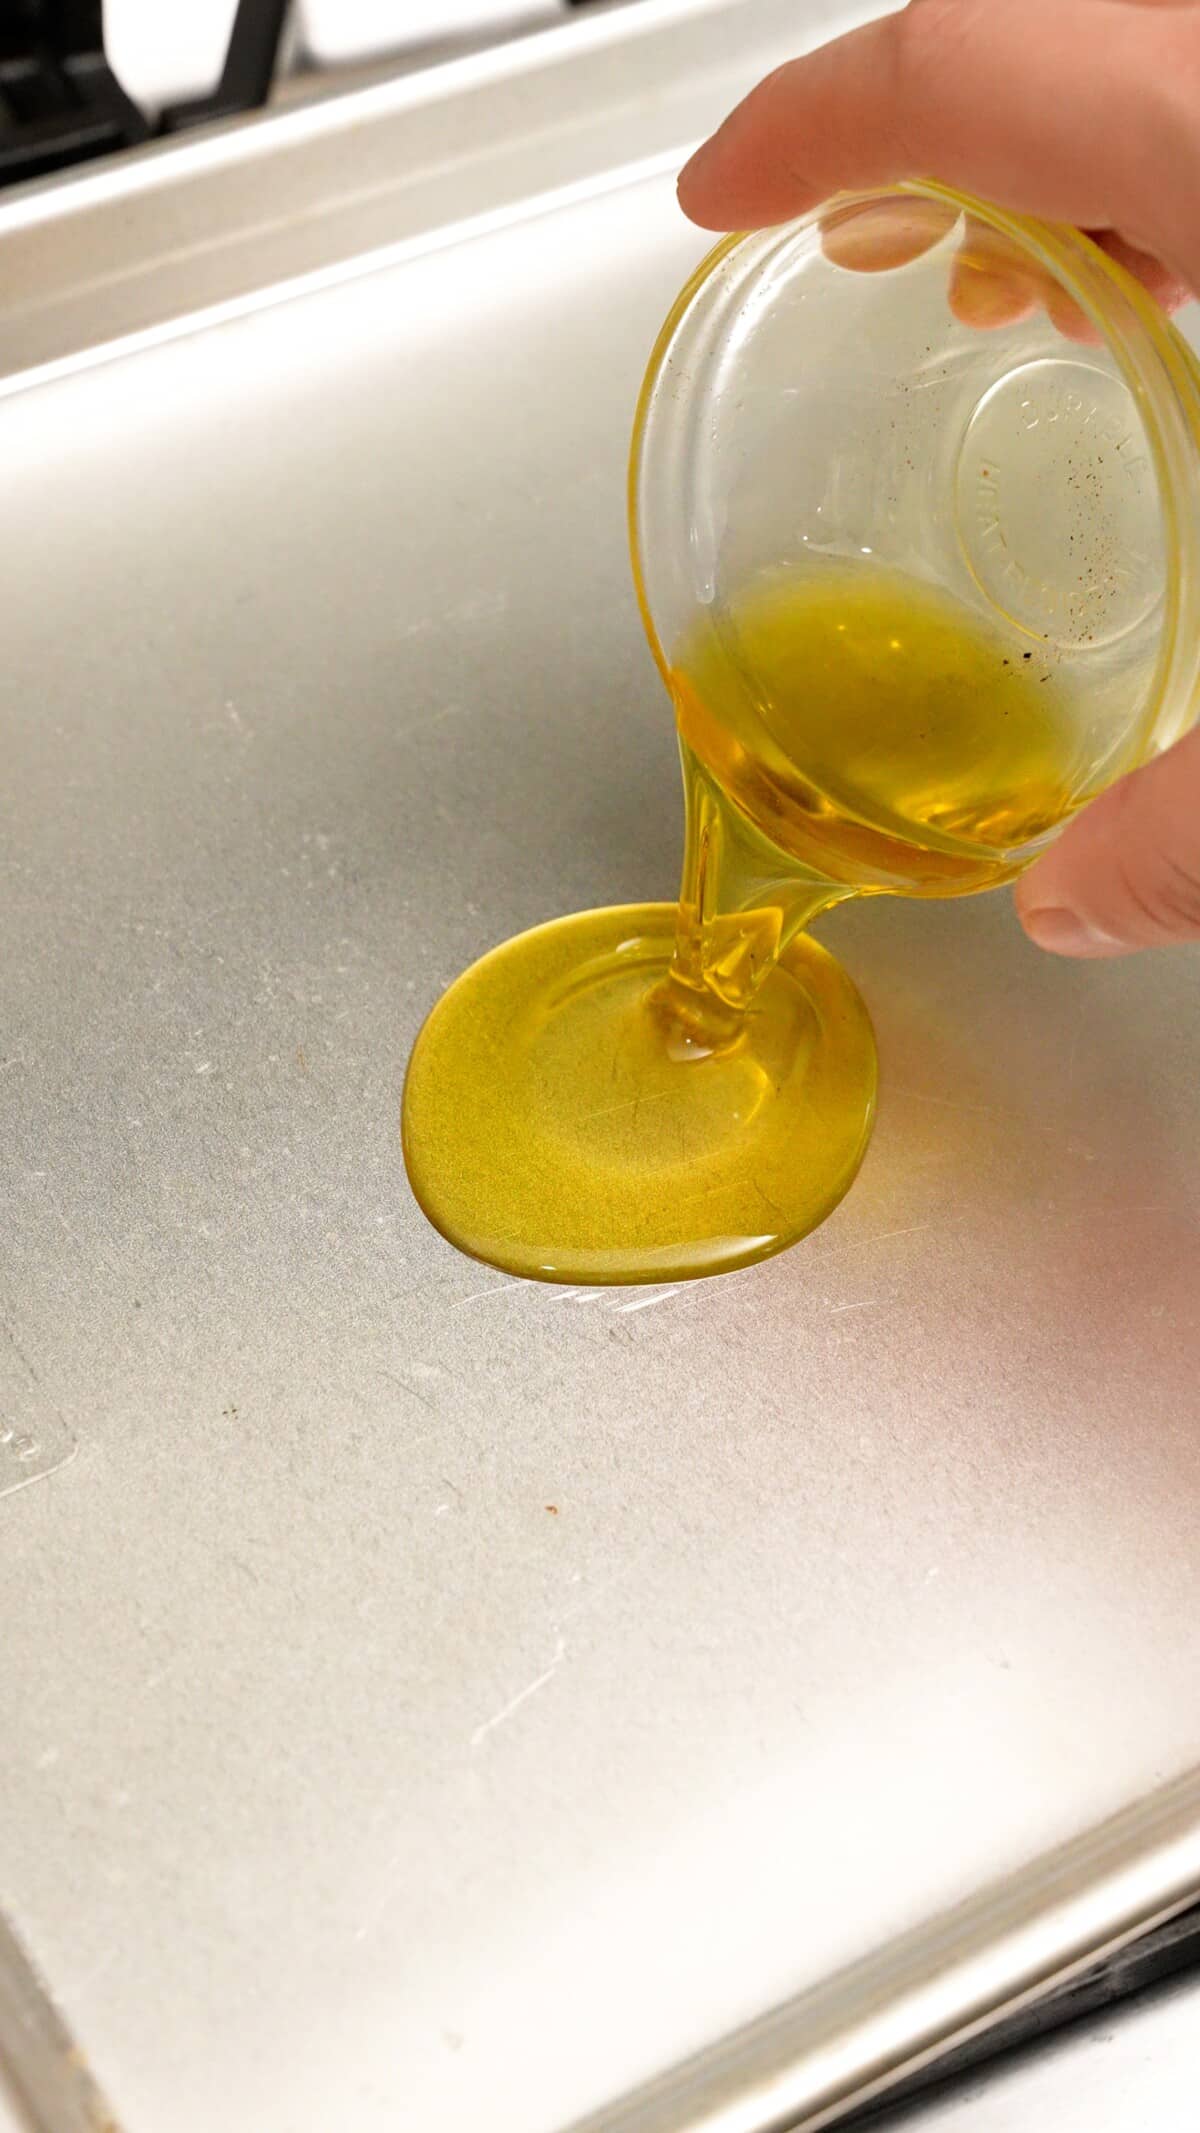 Pouring olive oil on a preheated baking sheet.